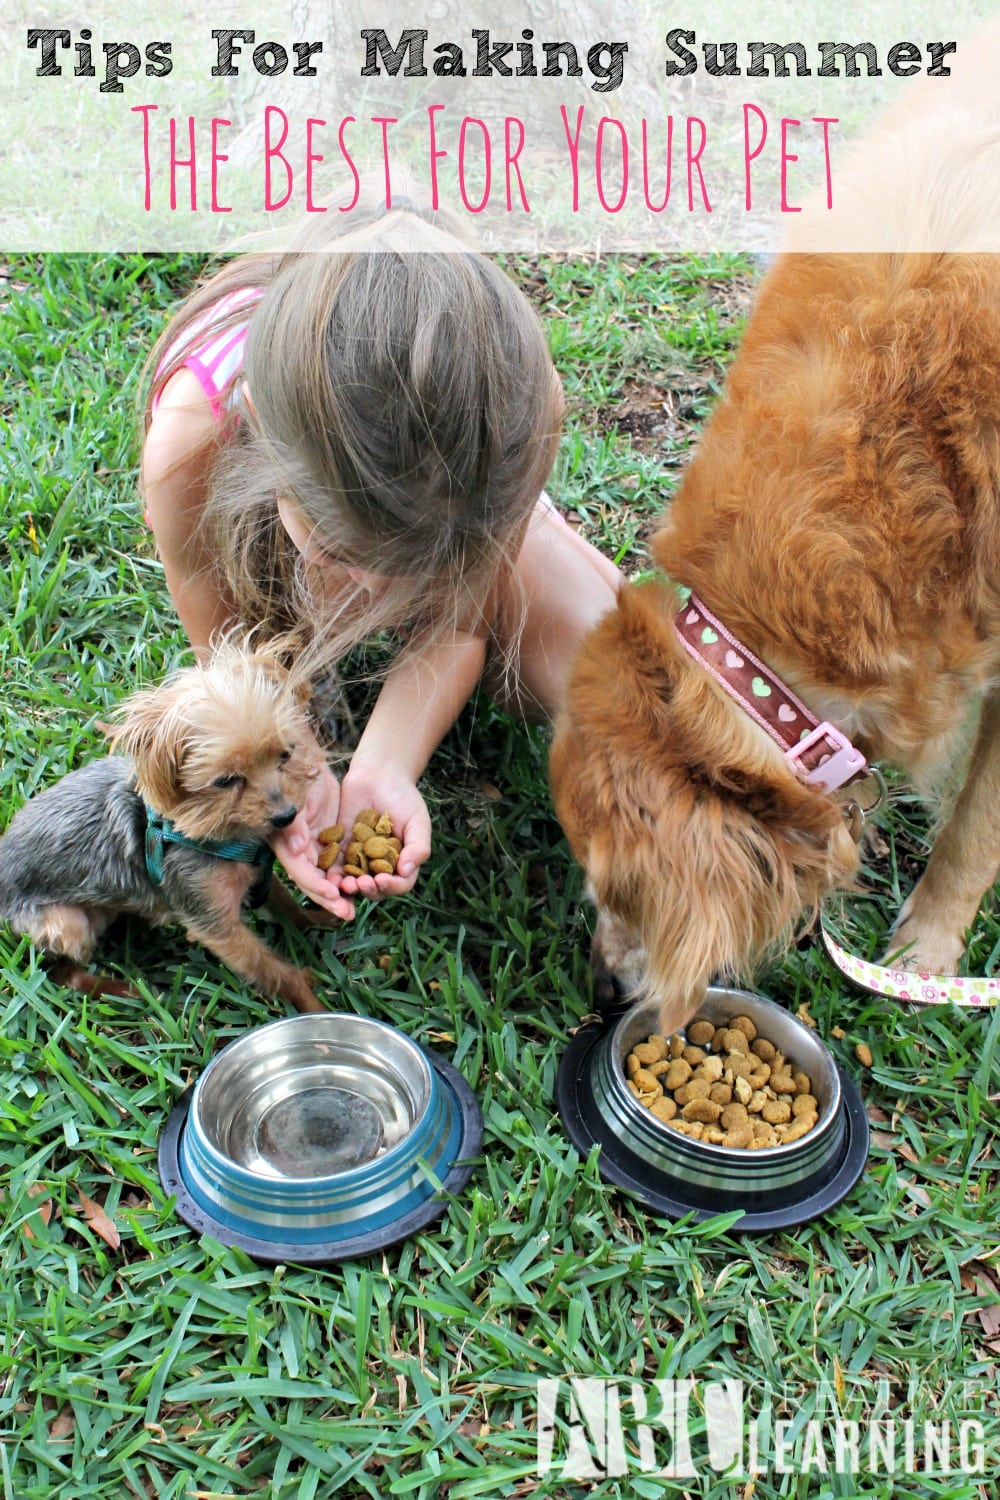 Tips For Making Summer the Best For Your Pets